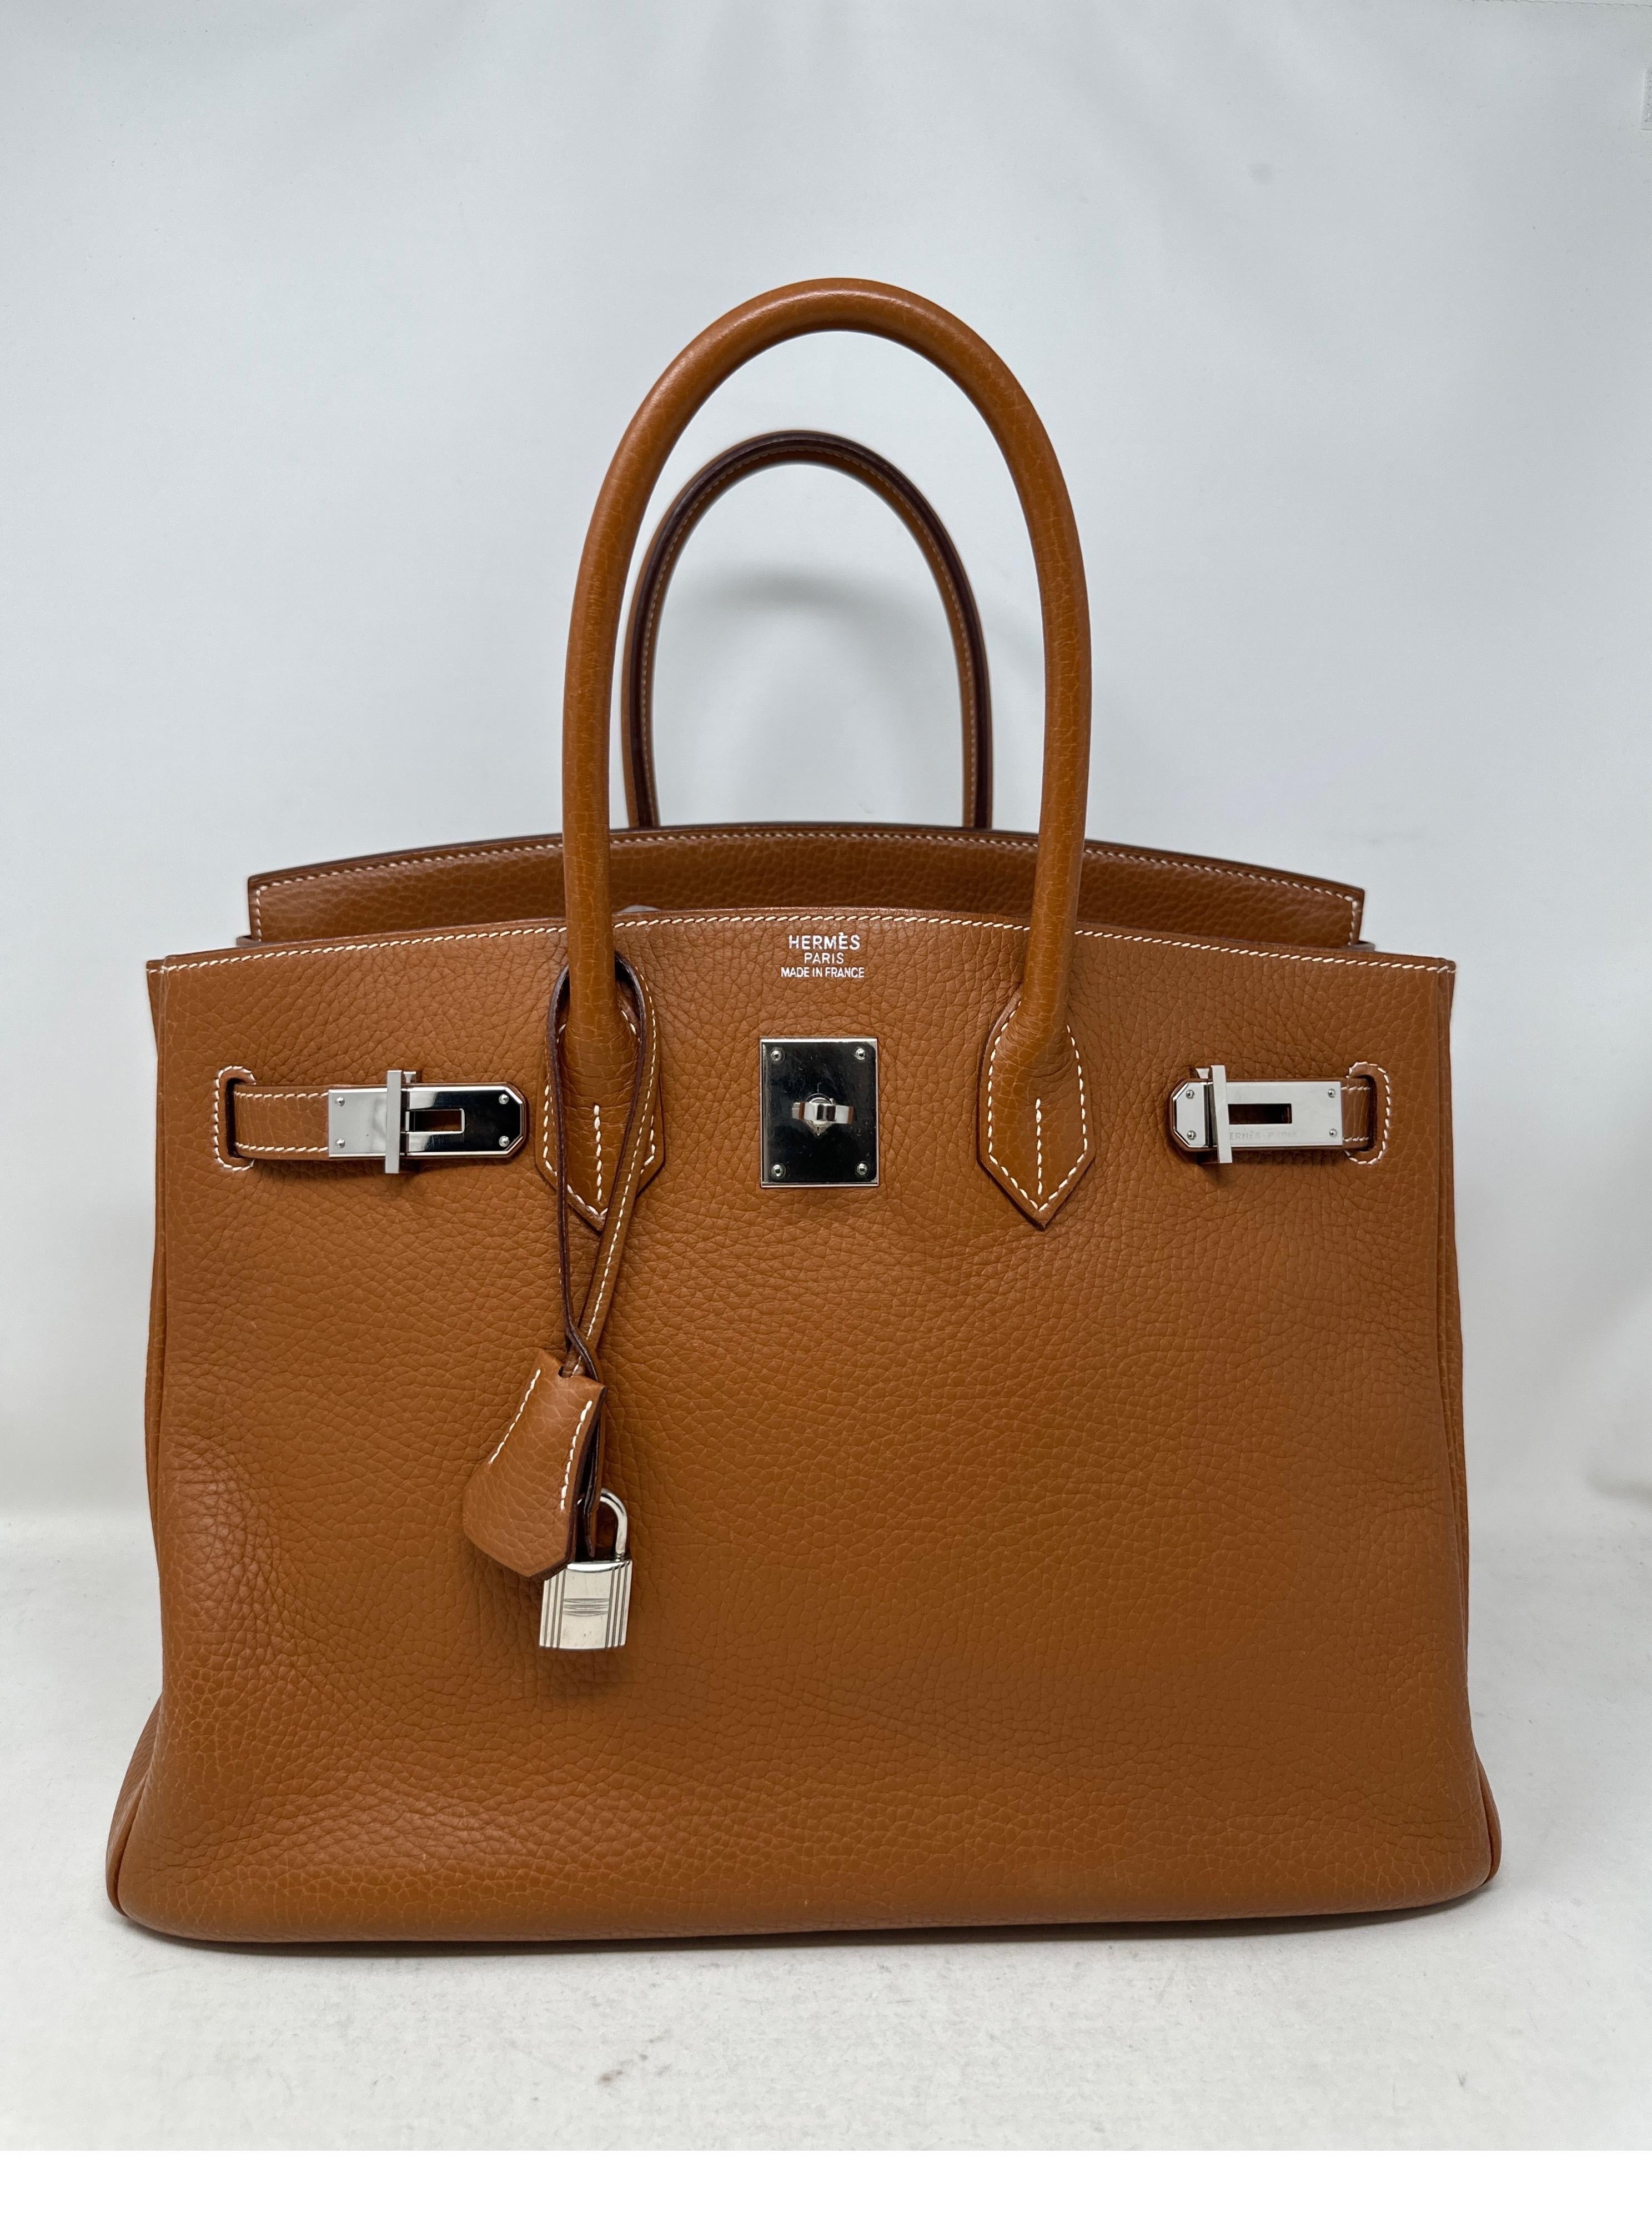 Hermes Gold Birkin 35 Bag. Clemence leather. Palladium silver hardware. Most wanted classic Hermes color gold. Tan brown color. Interior clean. Includes clochette, lock, keys, and dust bag. Guaranteed authentic. Don't miss out on this classic